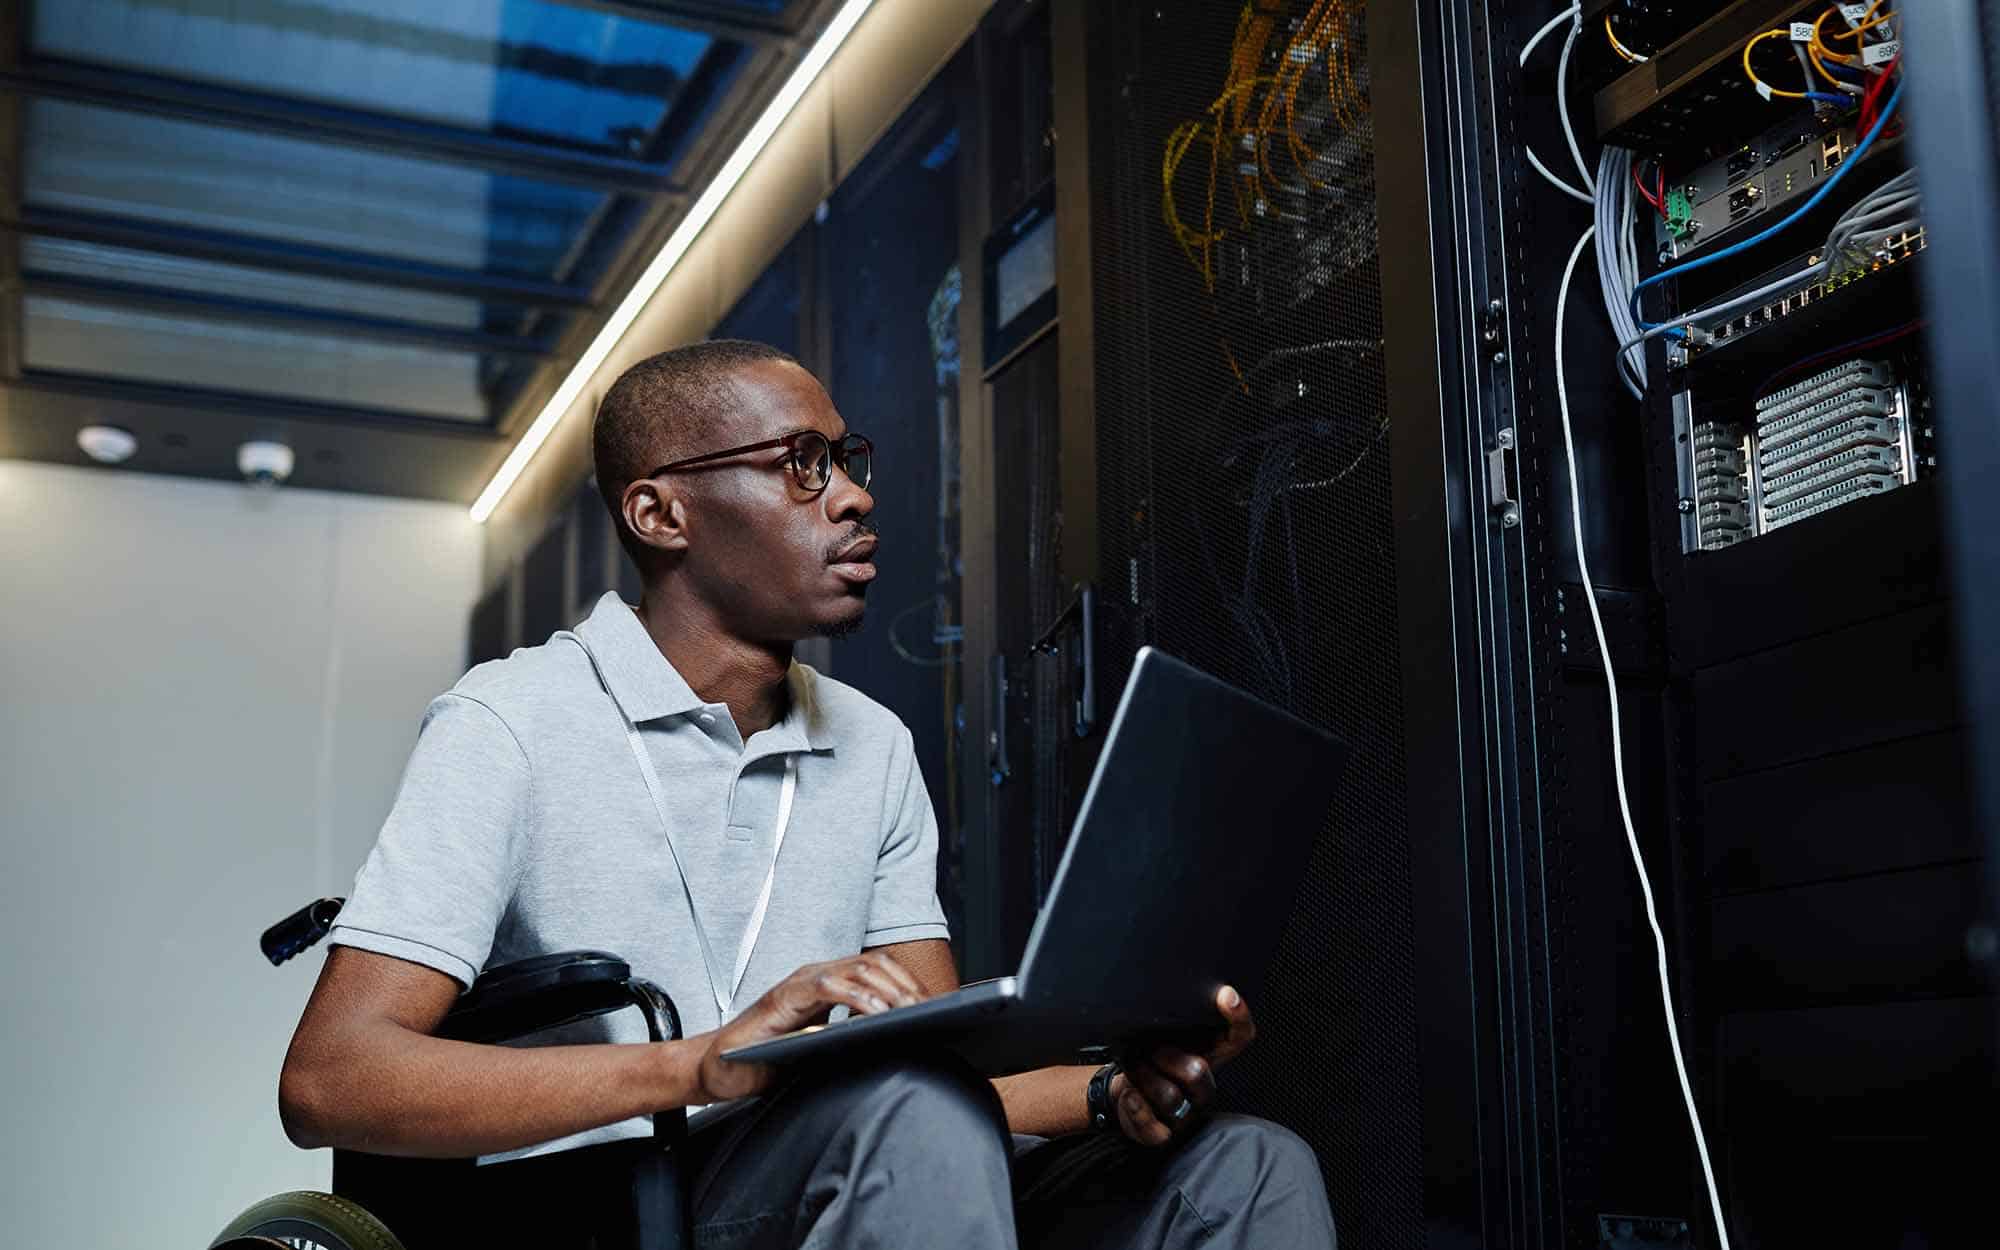 Portrait of young man working as IT technician and managing server network